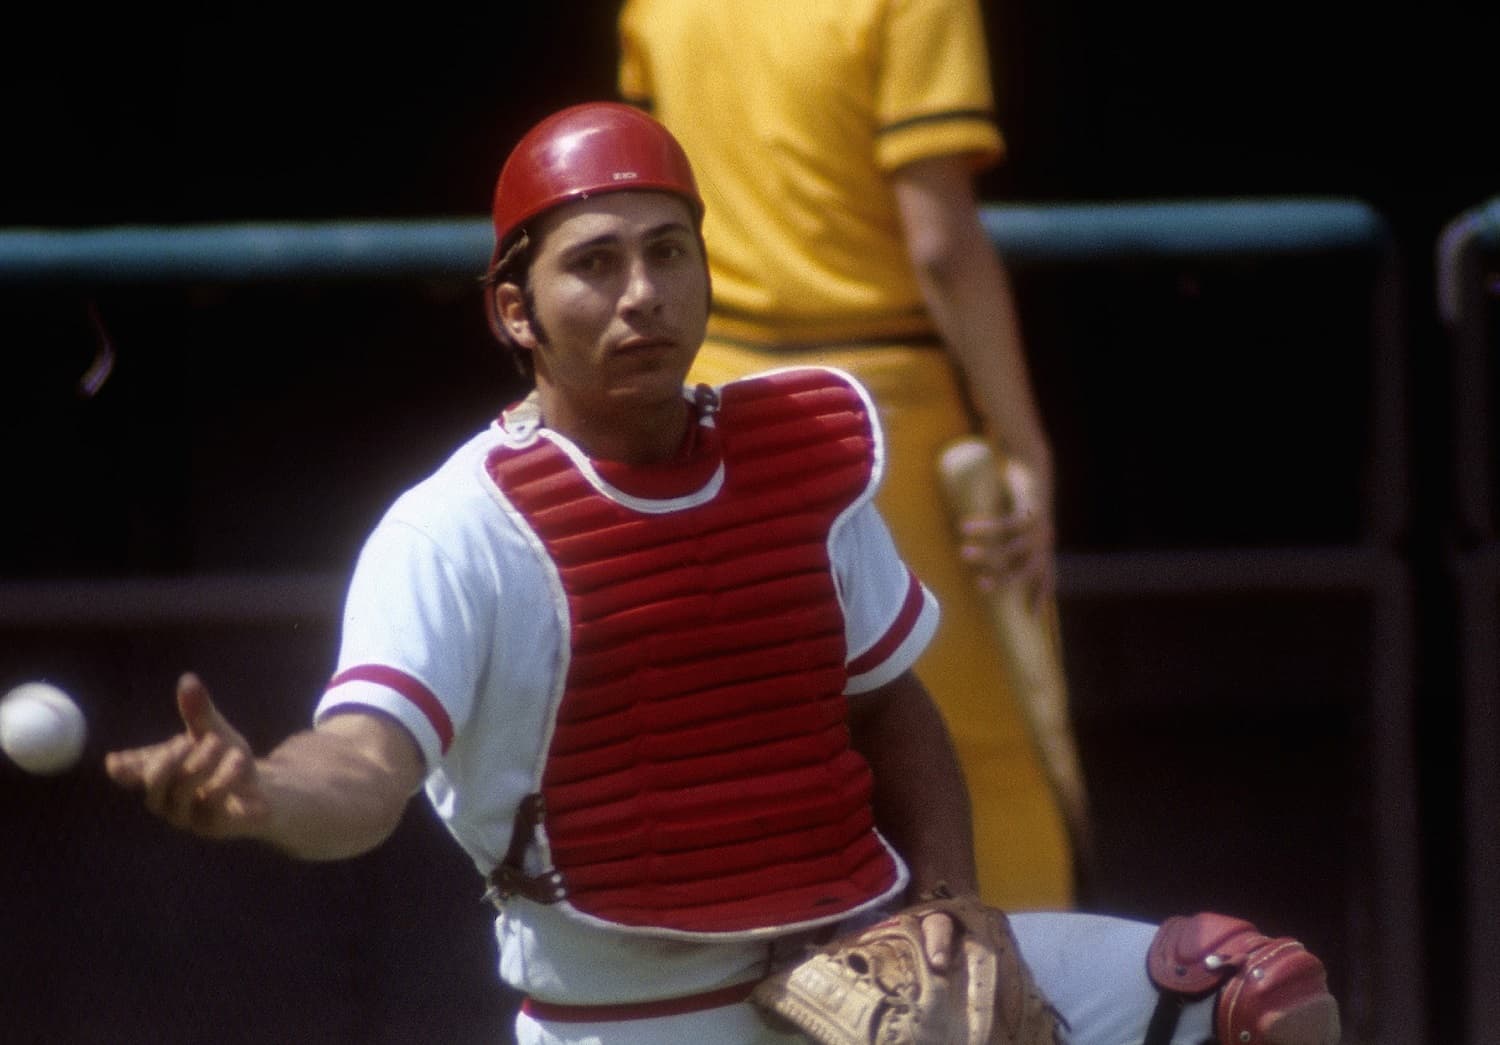 Johnny Bench, an All-Time Great MLB Catcher, Has a Surprising Net Worth